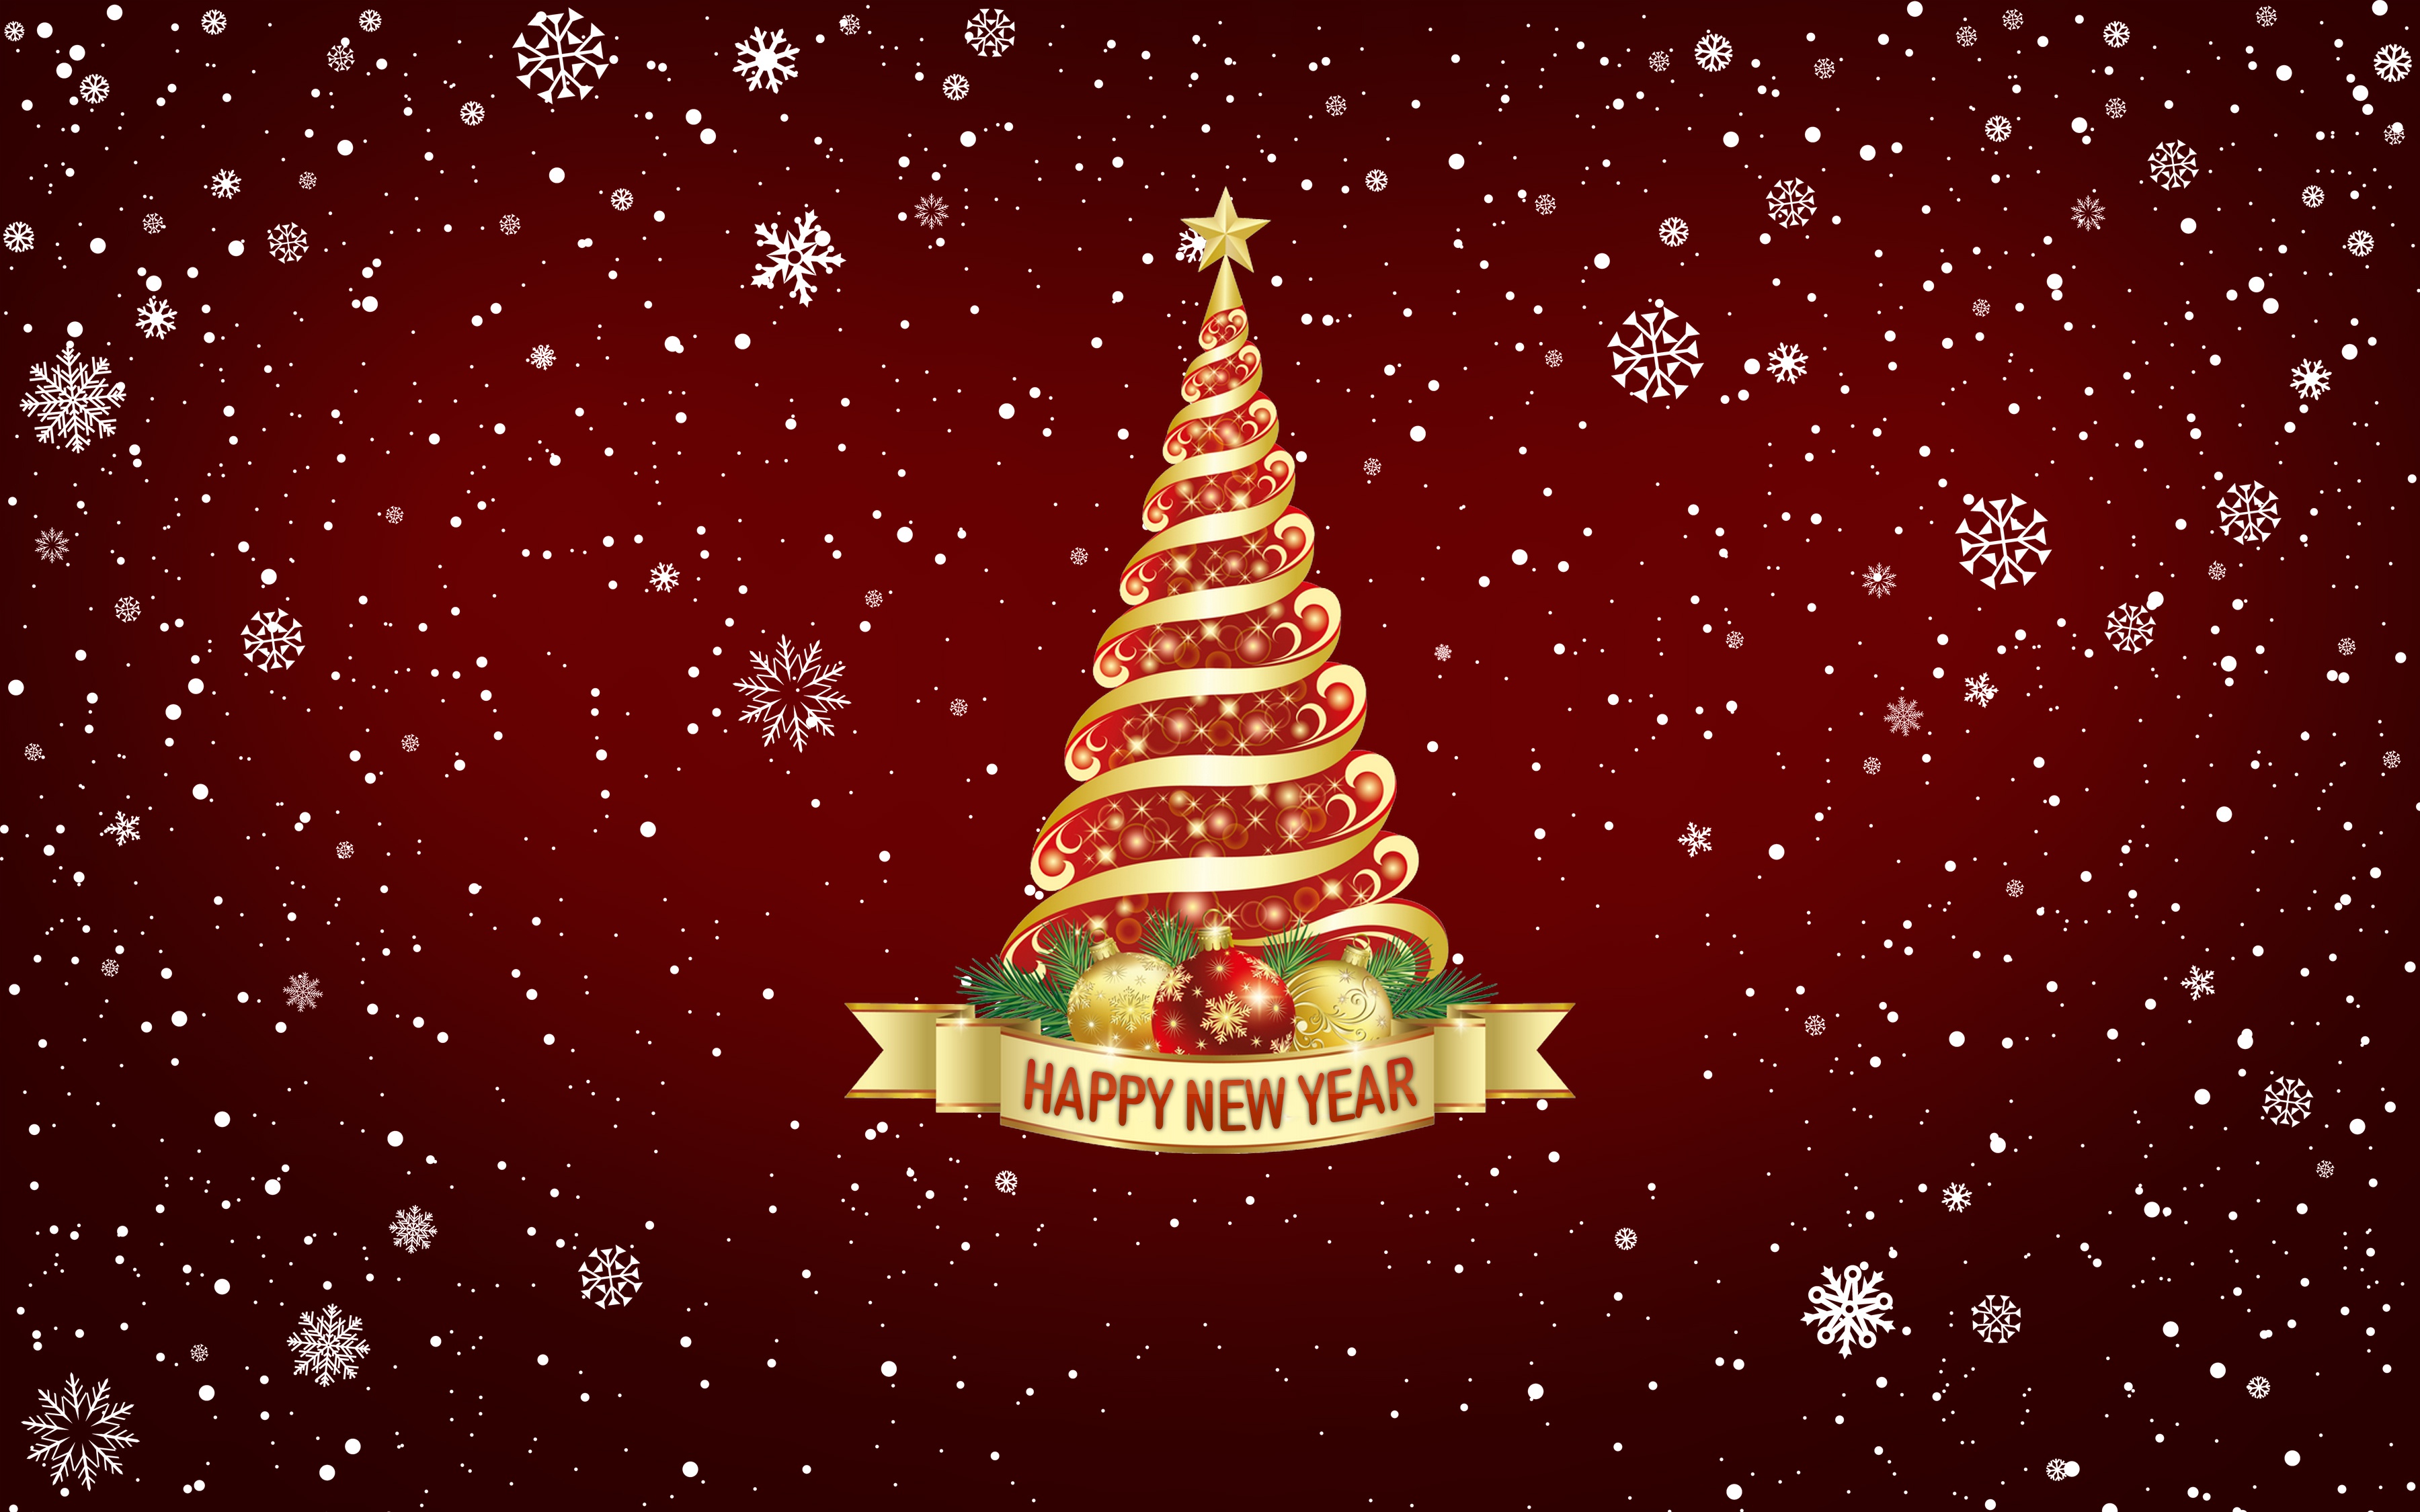 Happy New Year Christmas Tree 4K Wallpaper Download - High ...